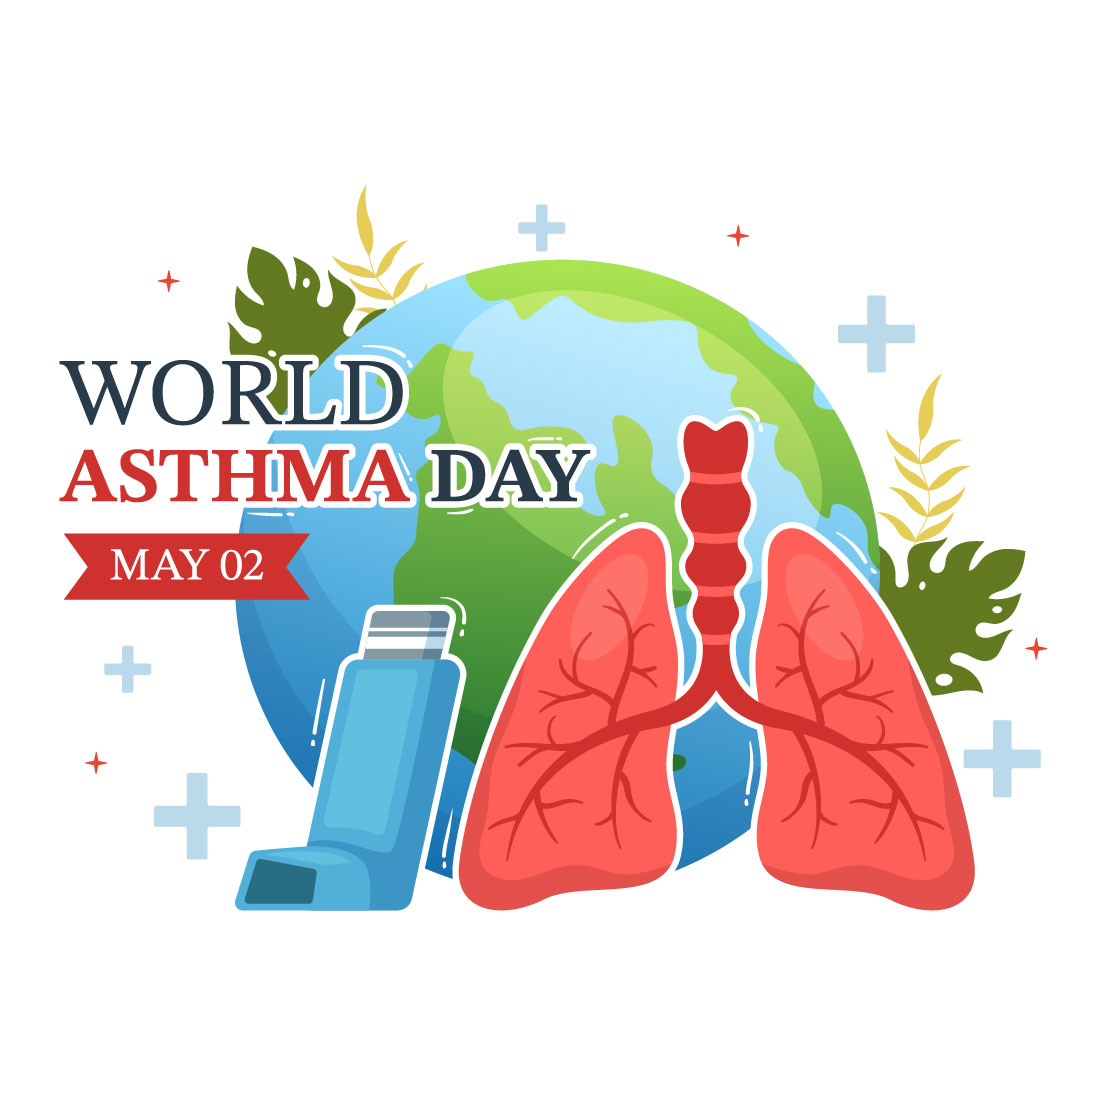 14 World Asthma Day Illustration cover image.